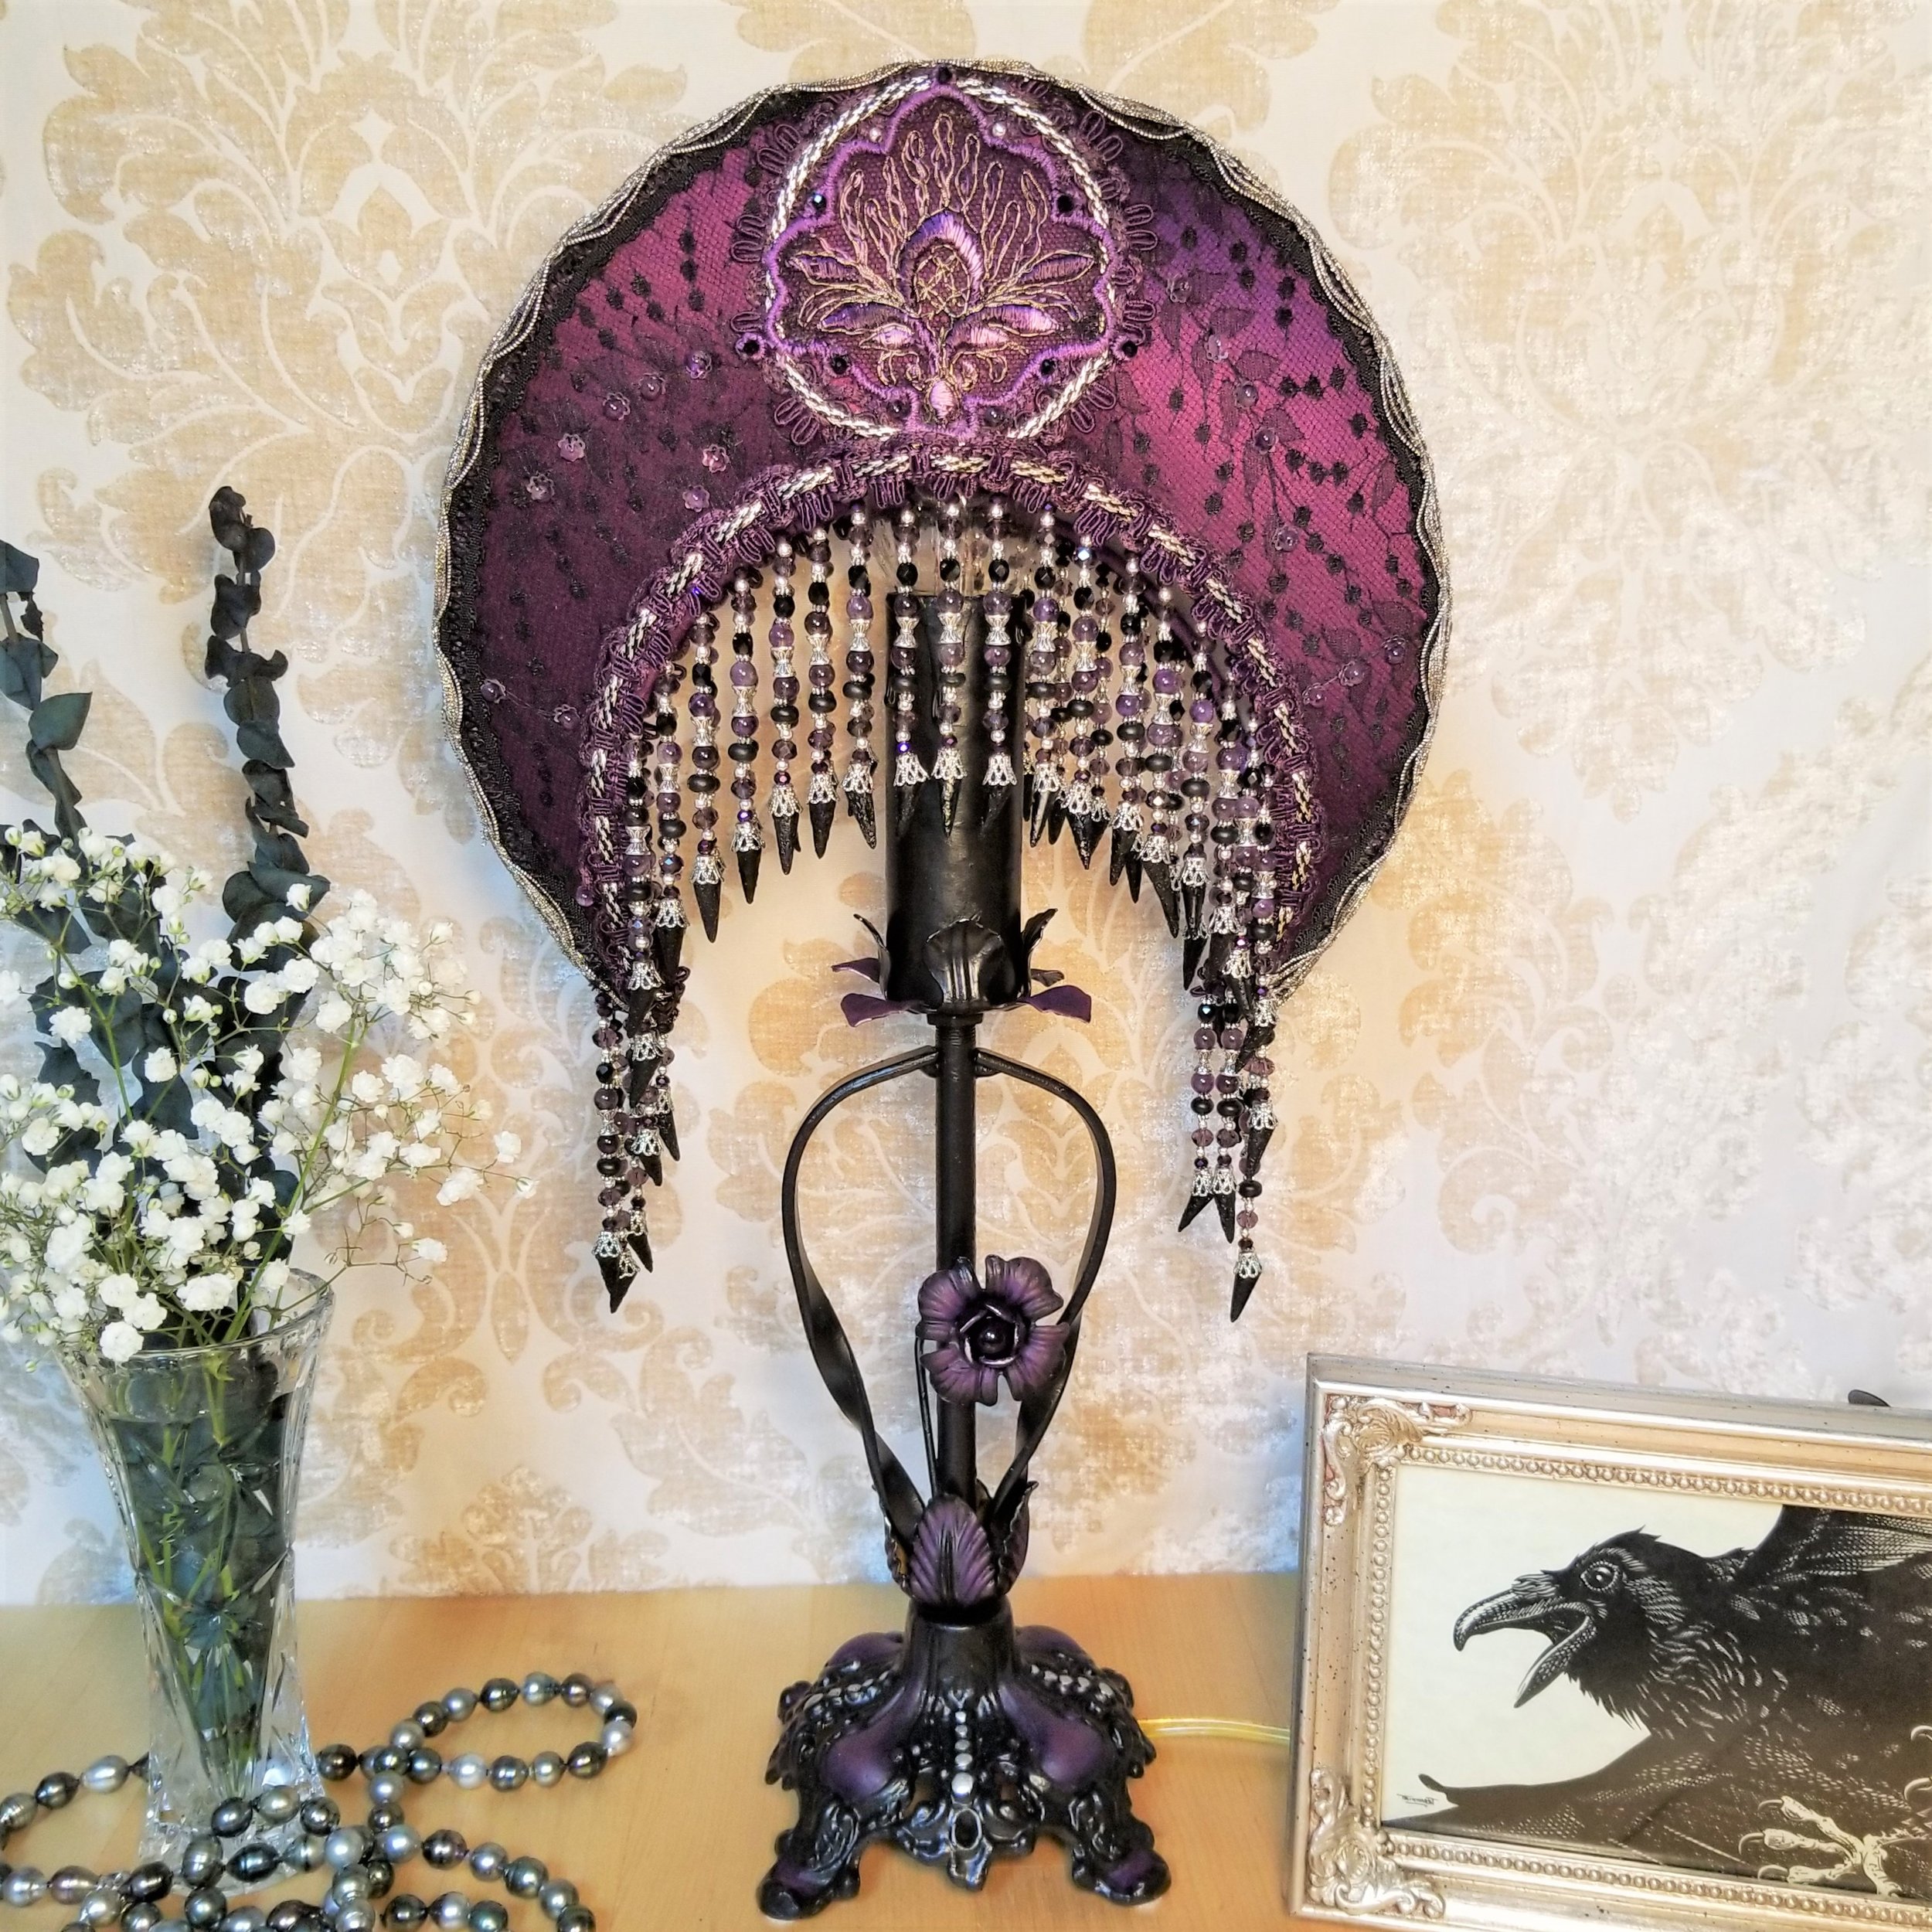 Gothic Victorian Lampshade and Antique Lamp by Elegance Lamps